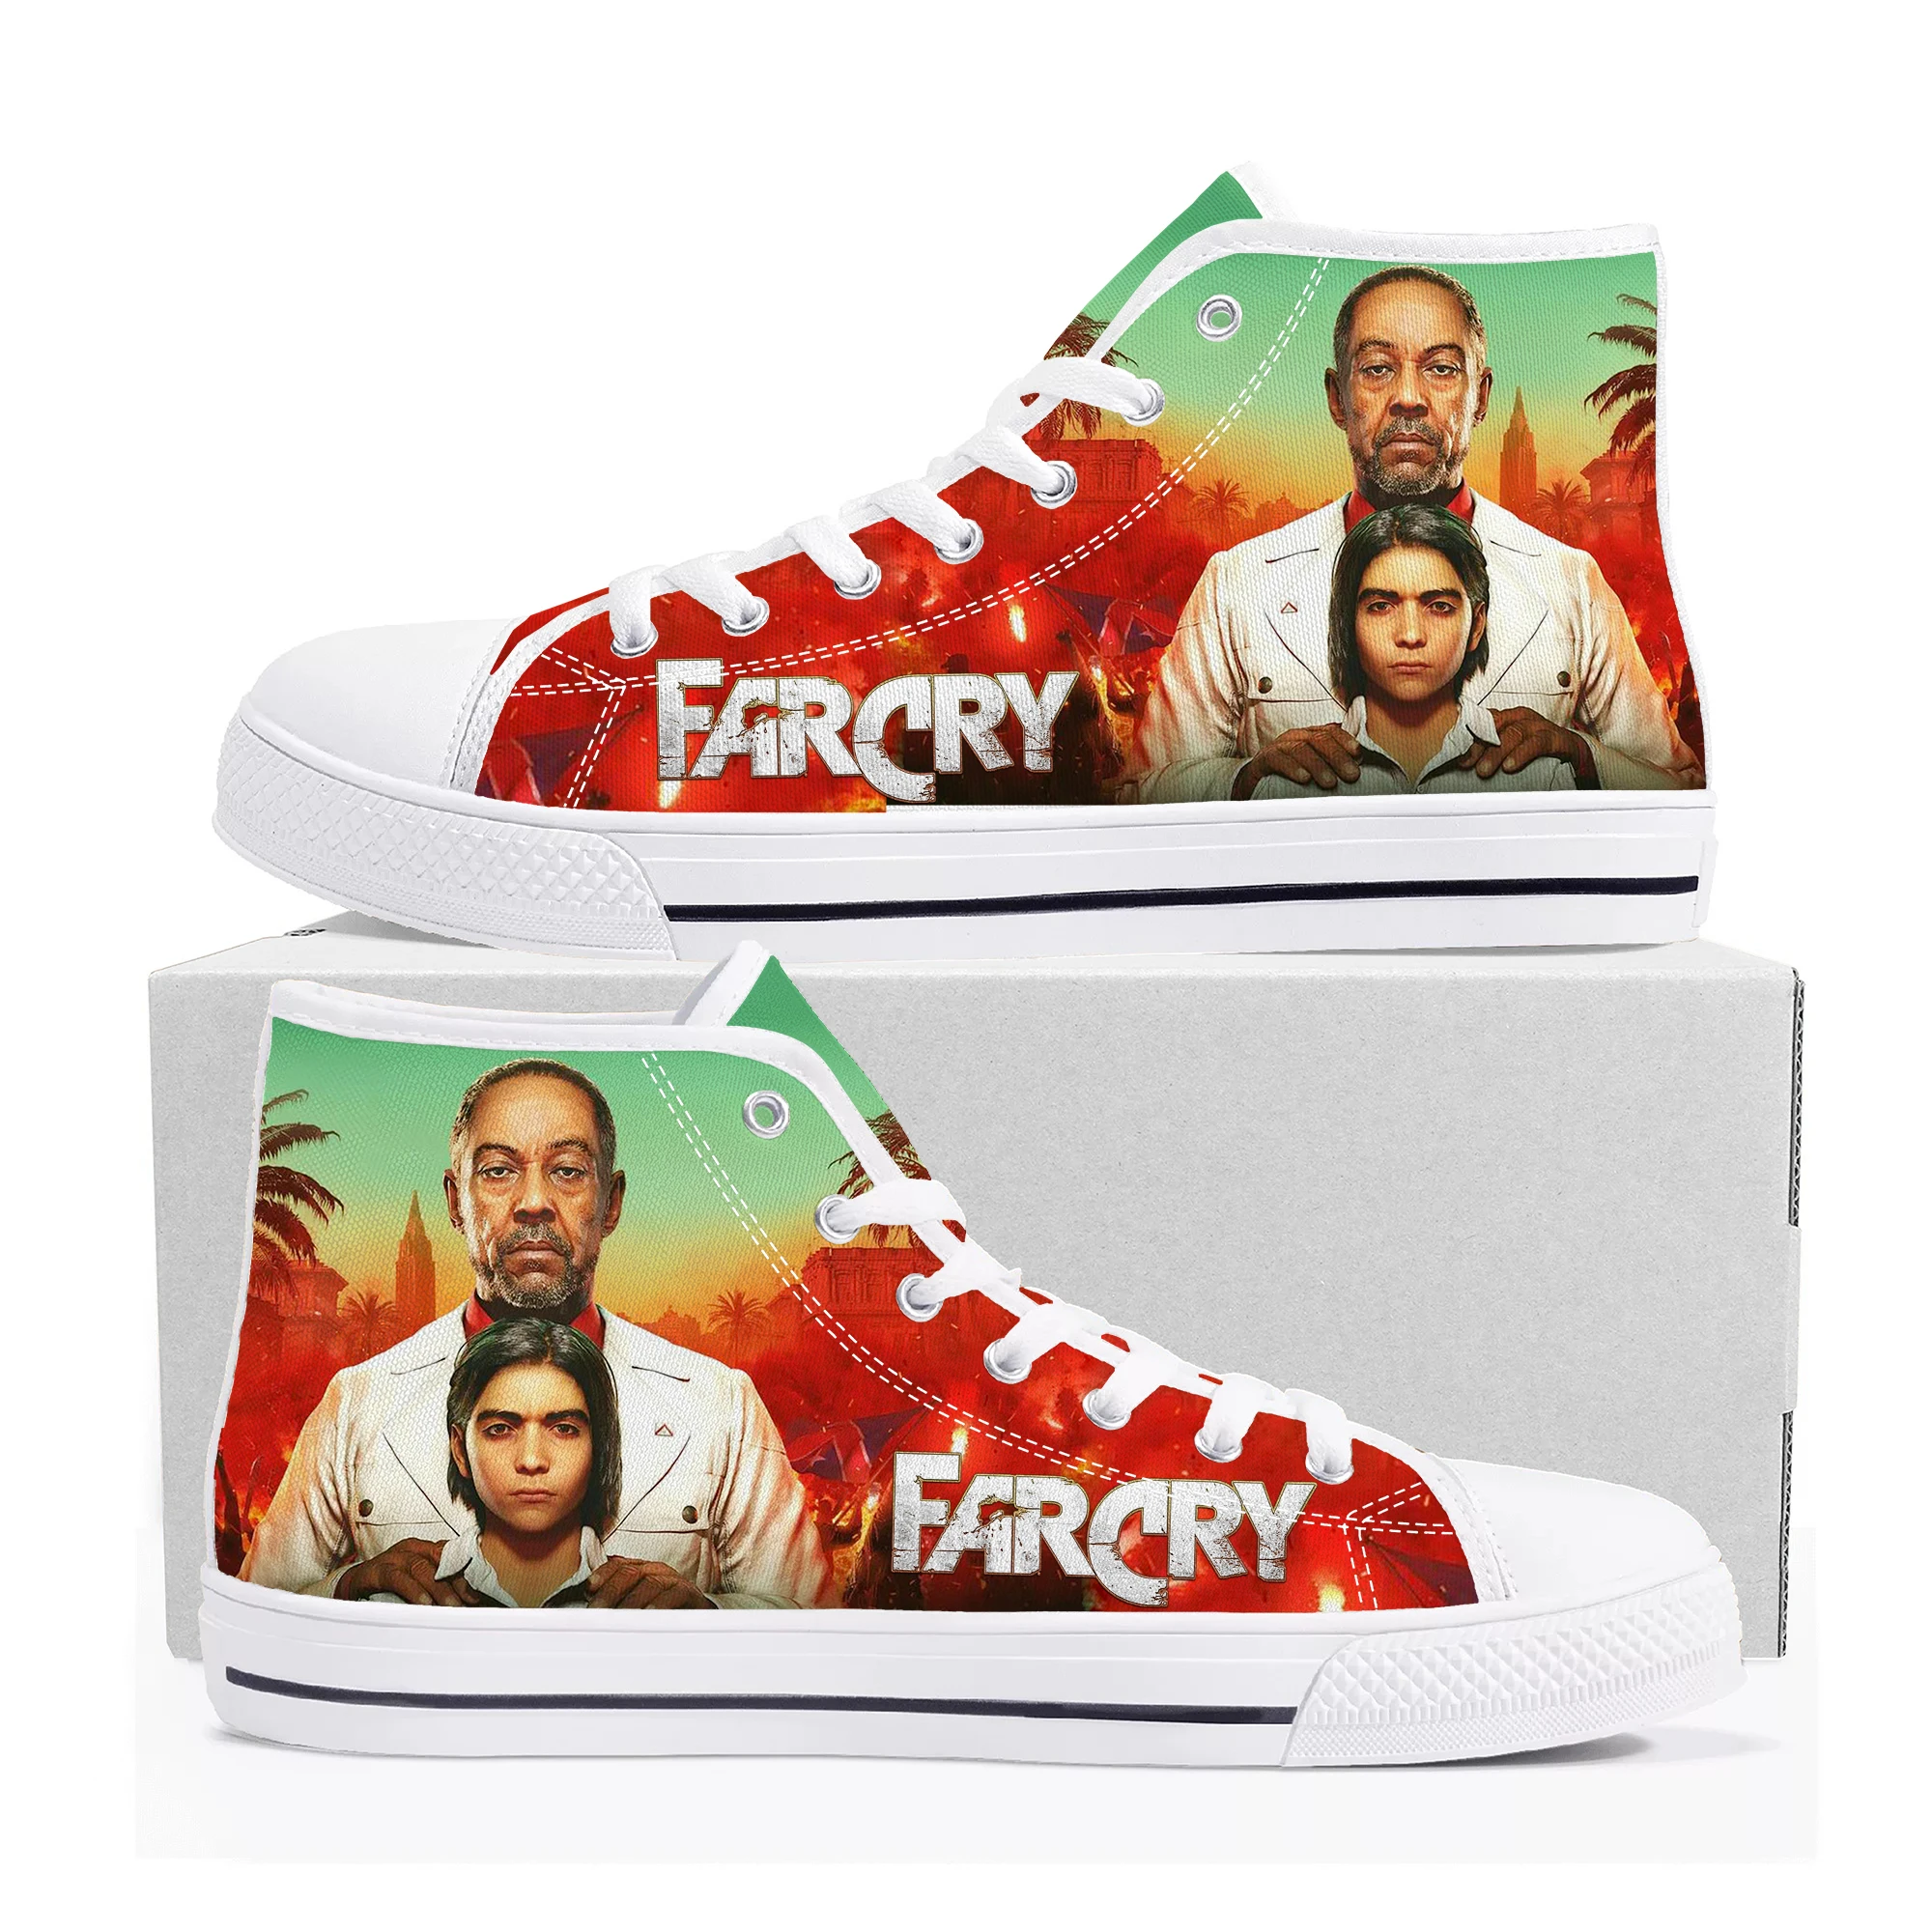 

Far Cry Custom High Top Sneakers Cartoon Game Mens Womens Teenager High Quality Canvas Shoes Casual Fashion Tailor Made Sneaker